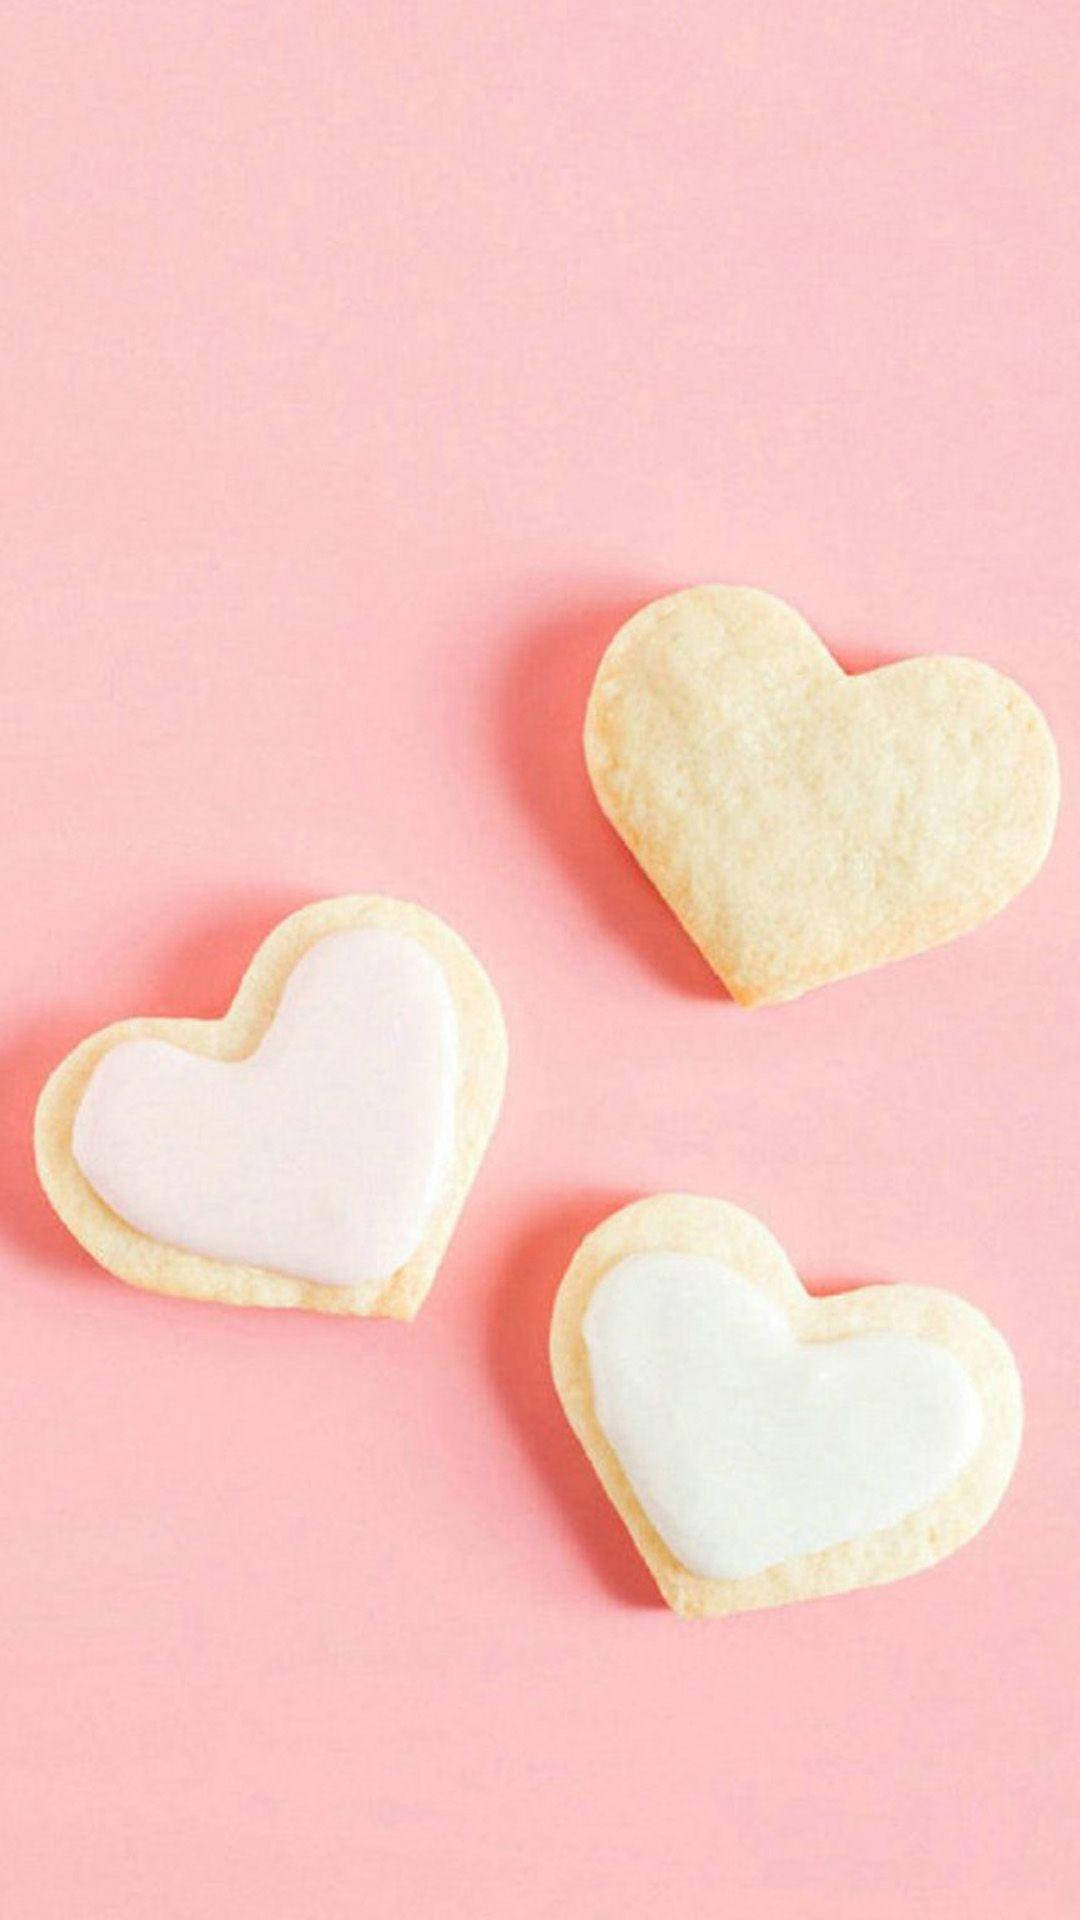 Adorable Heart-Shaped Cookies with Filling Wallpaper